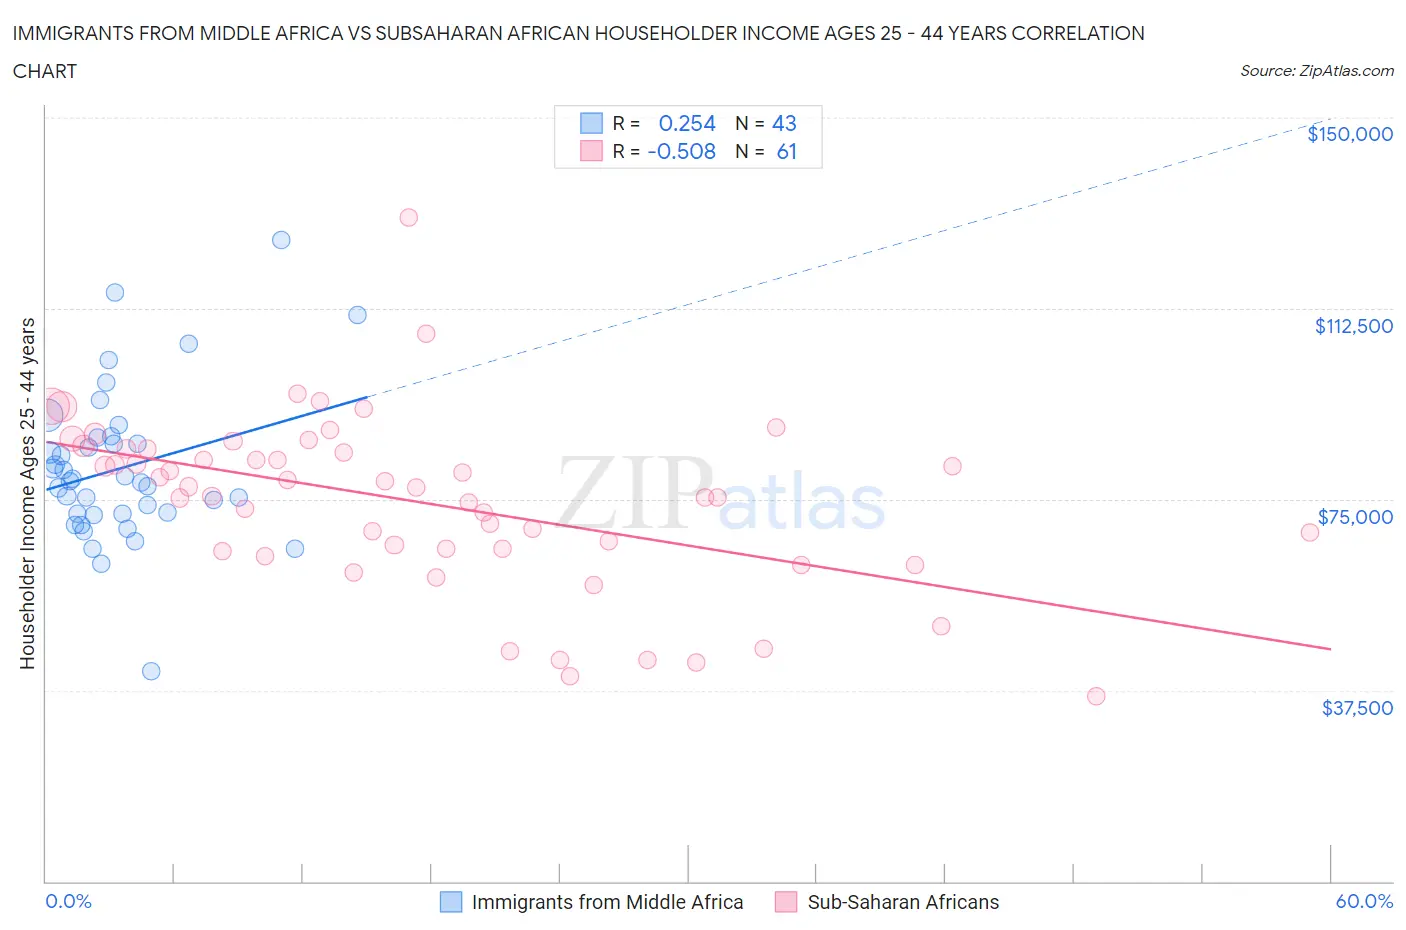 Immigrants from Middle Africa vs Subsaharan African Householder Income Ages 25 - 44 years